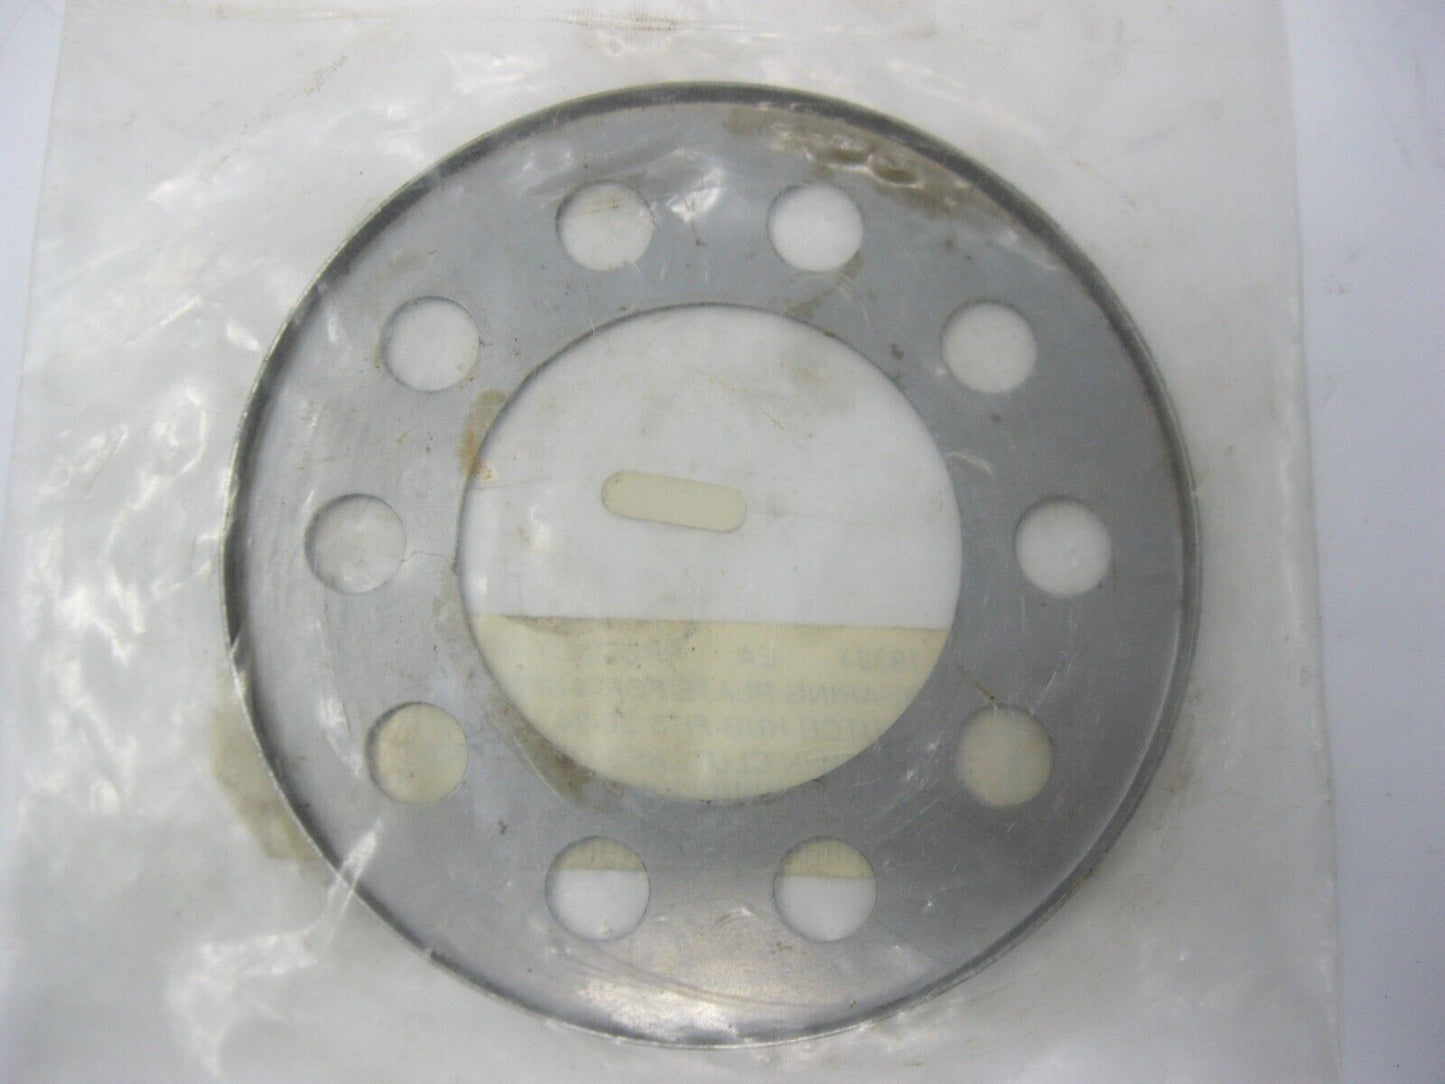 Custom Chrome Bearing Plate for 4 Speed Clutch Hub. Replaces OEM 37576-41  19384